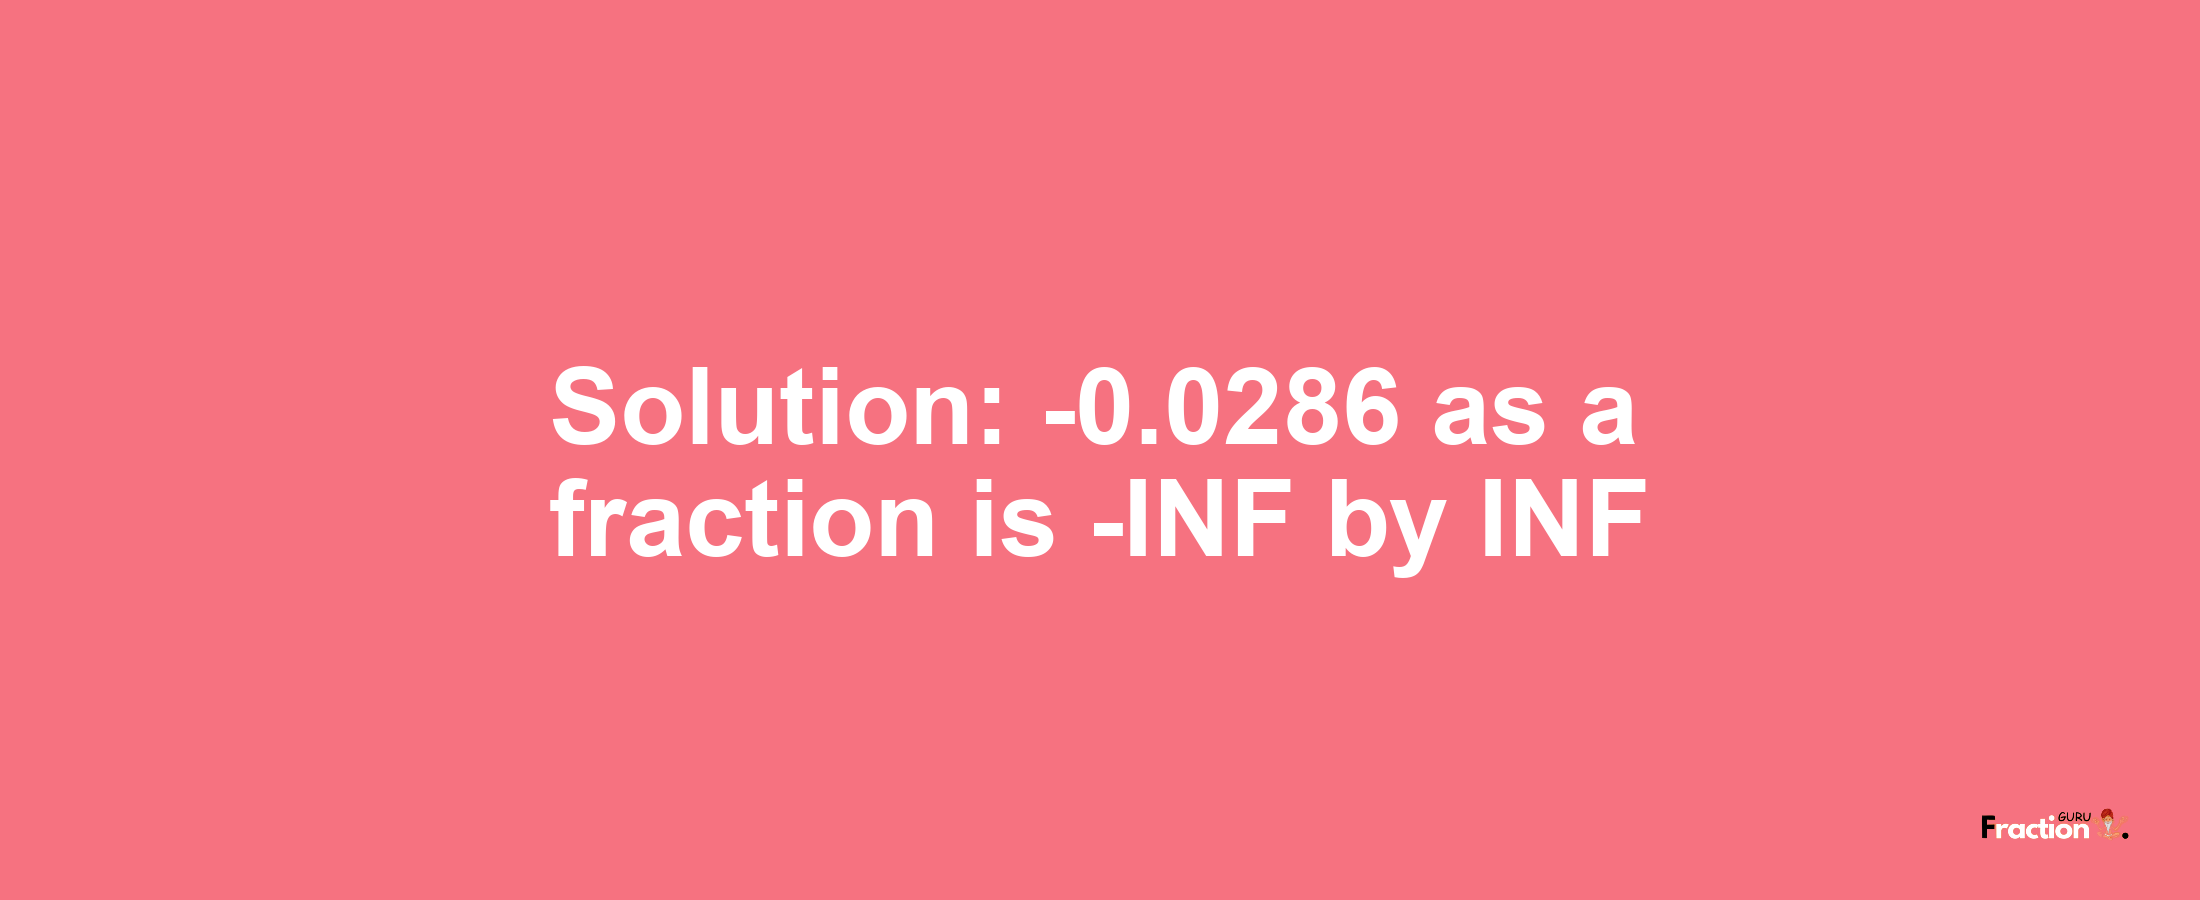 Solution:-0.0286 as a fraction is -INF/INF